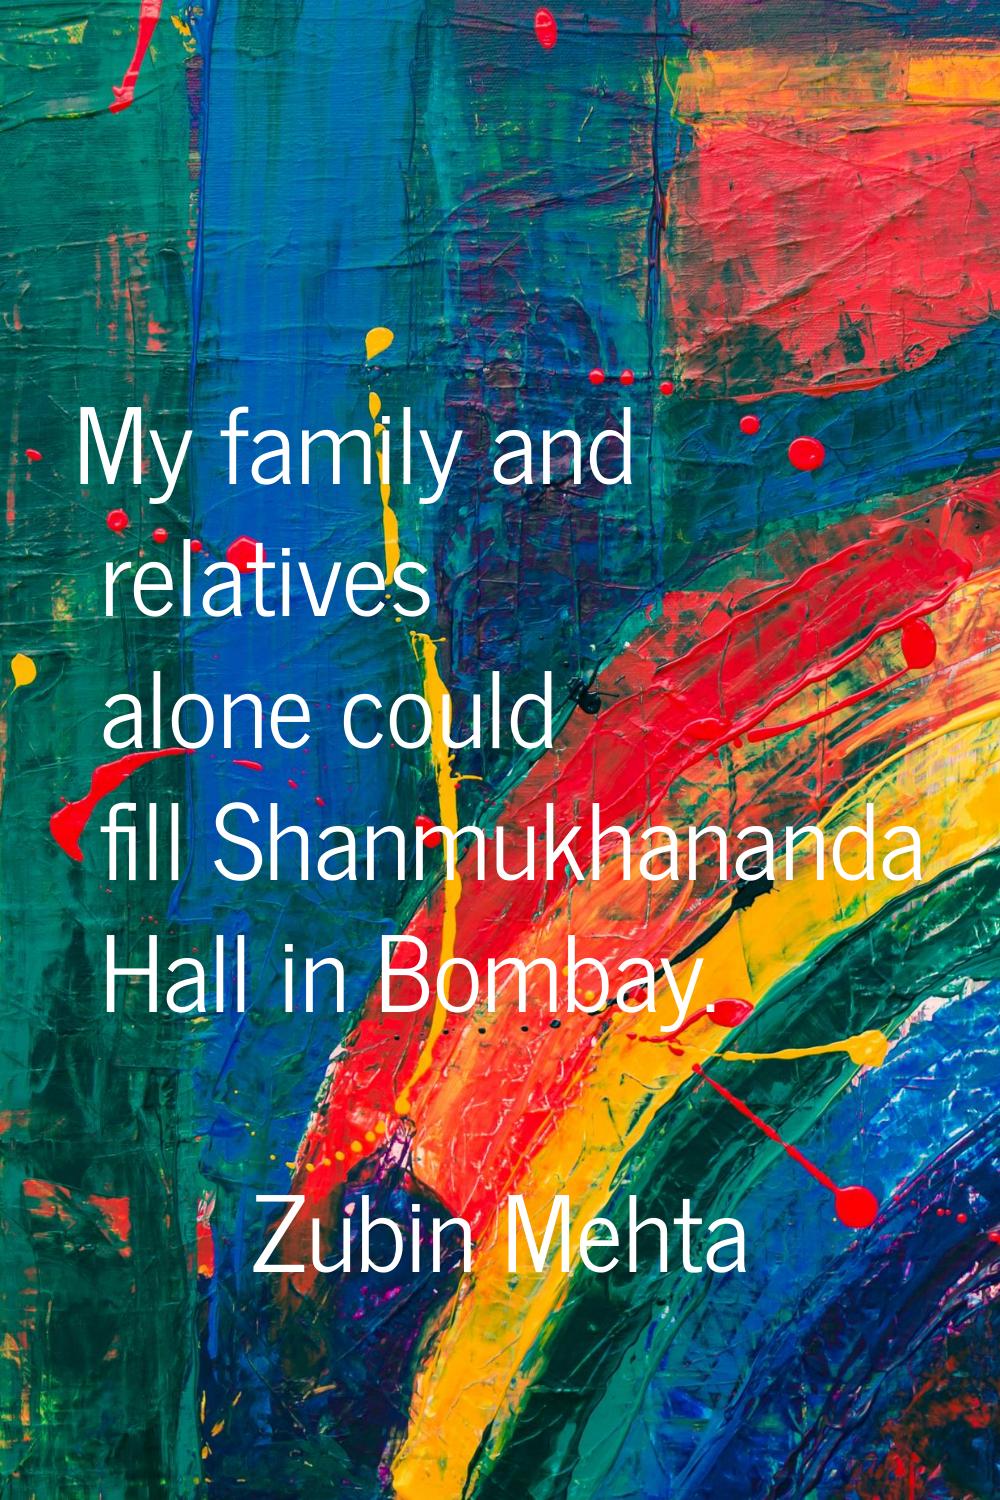 My family and relatives alone could fill Shanmukhananda Hall in Bombay.